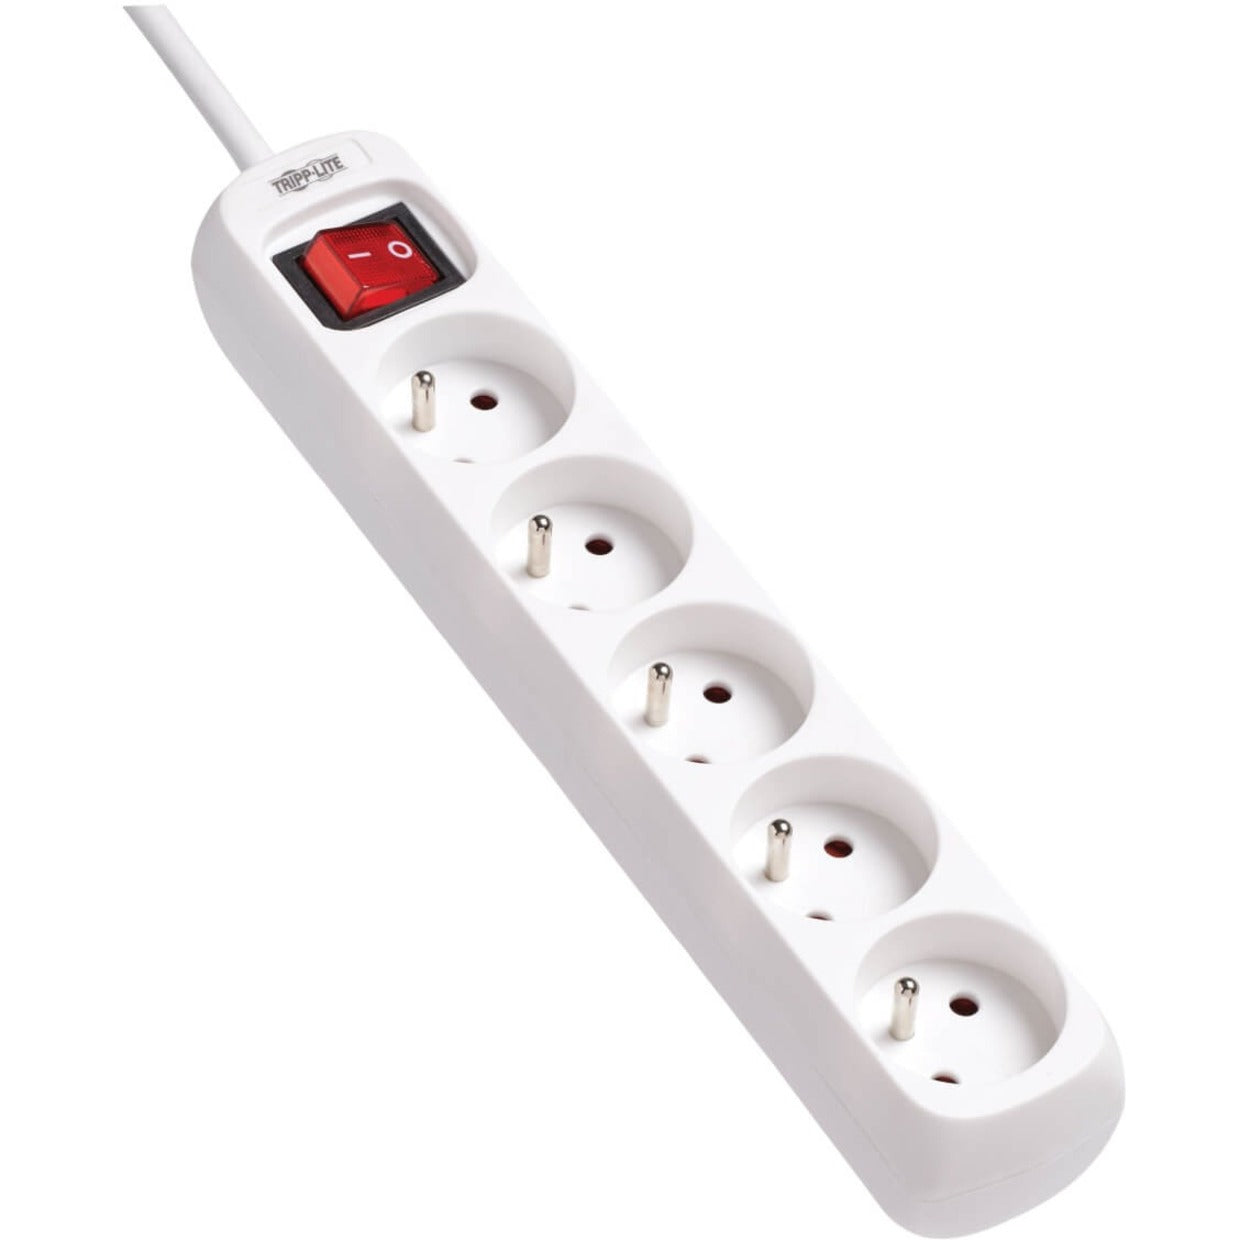 Tripp Lite PS5F15 Protect It! 5-Outlet Power Strip, French Type E, White